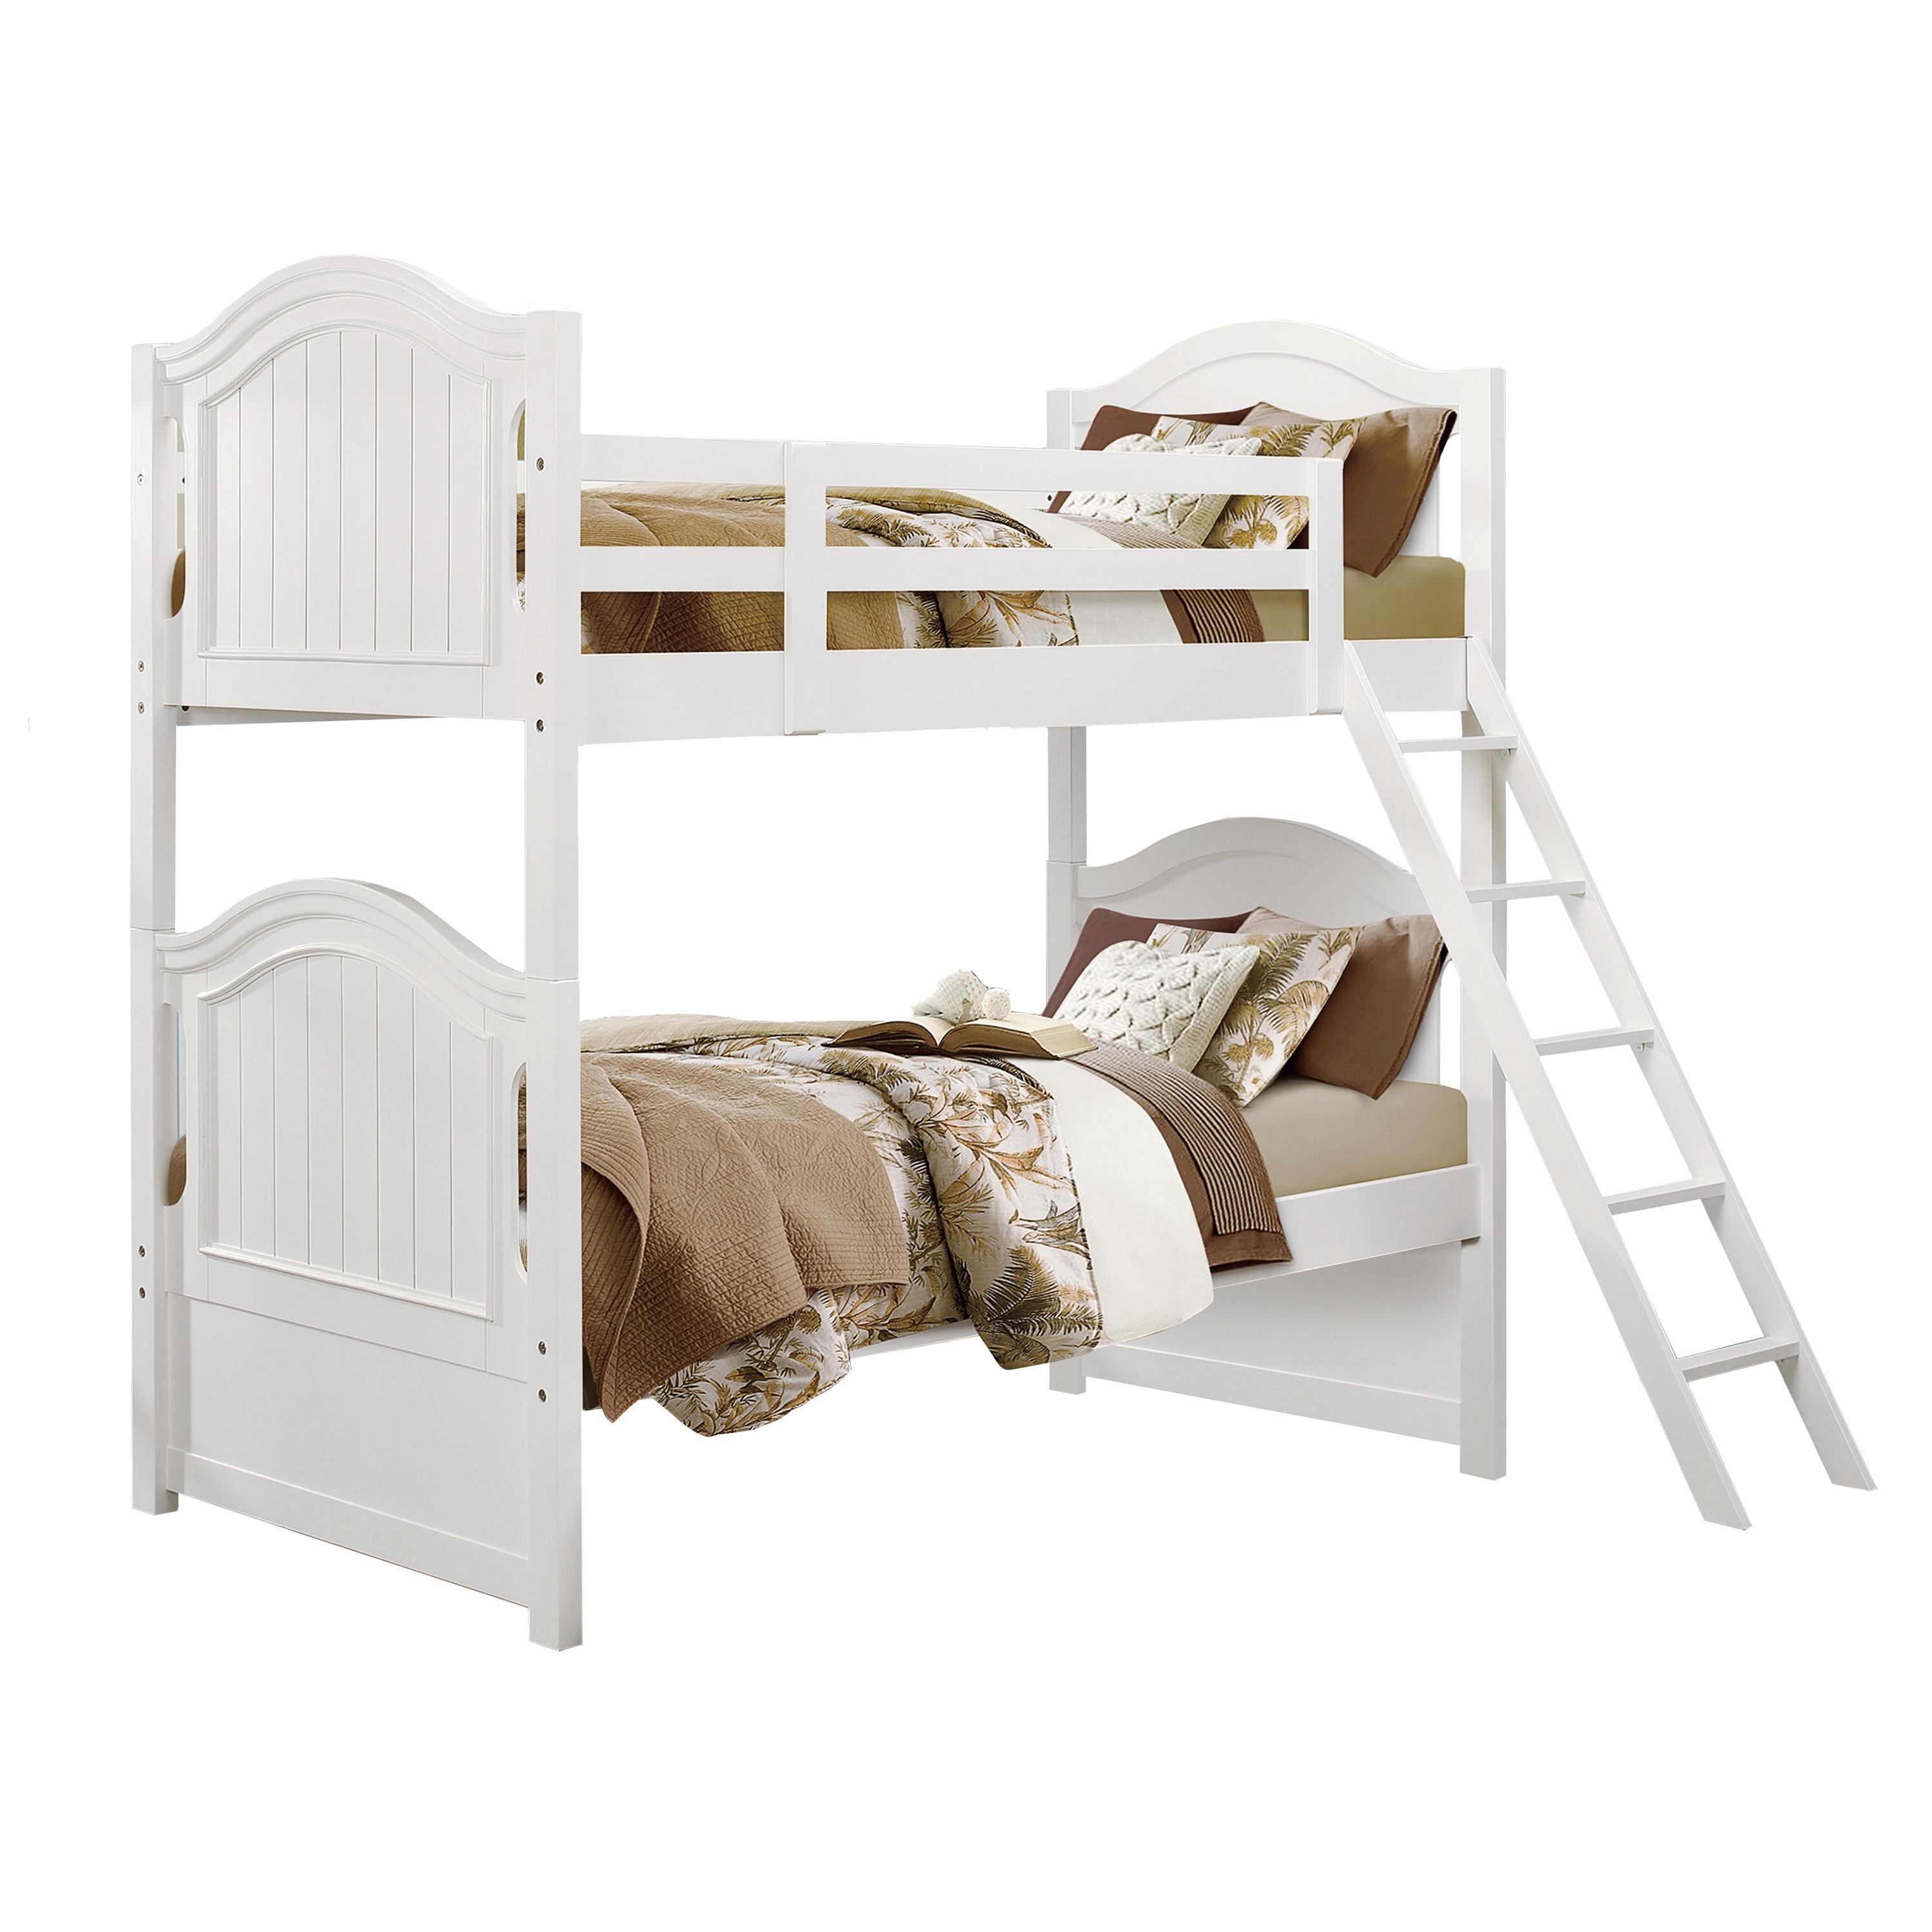 Homelegance B1799-1* Clementine Bunk Bed